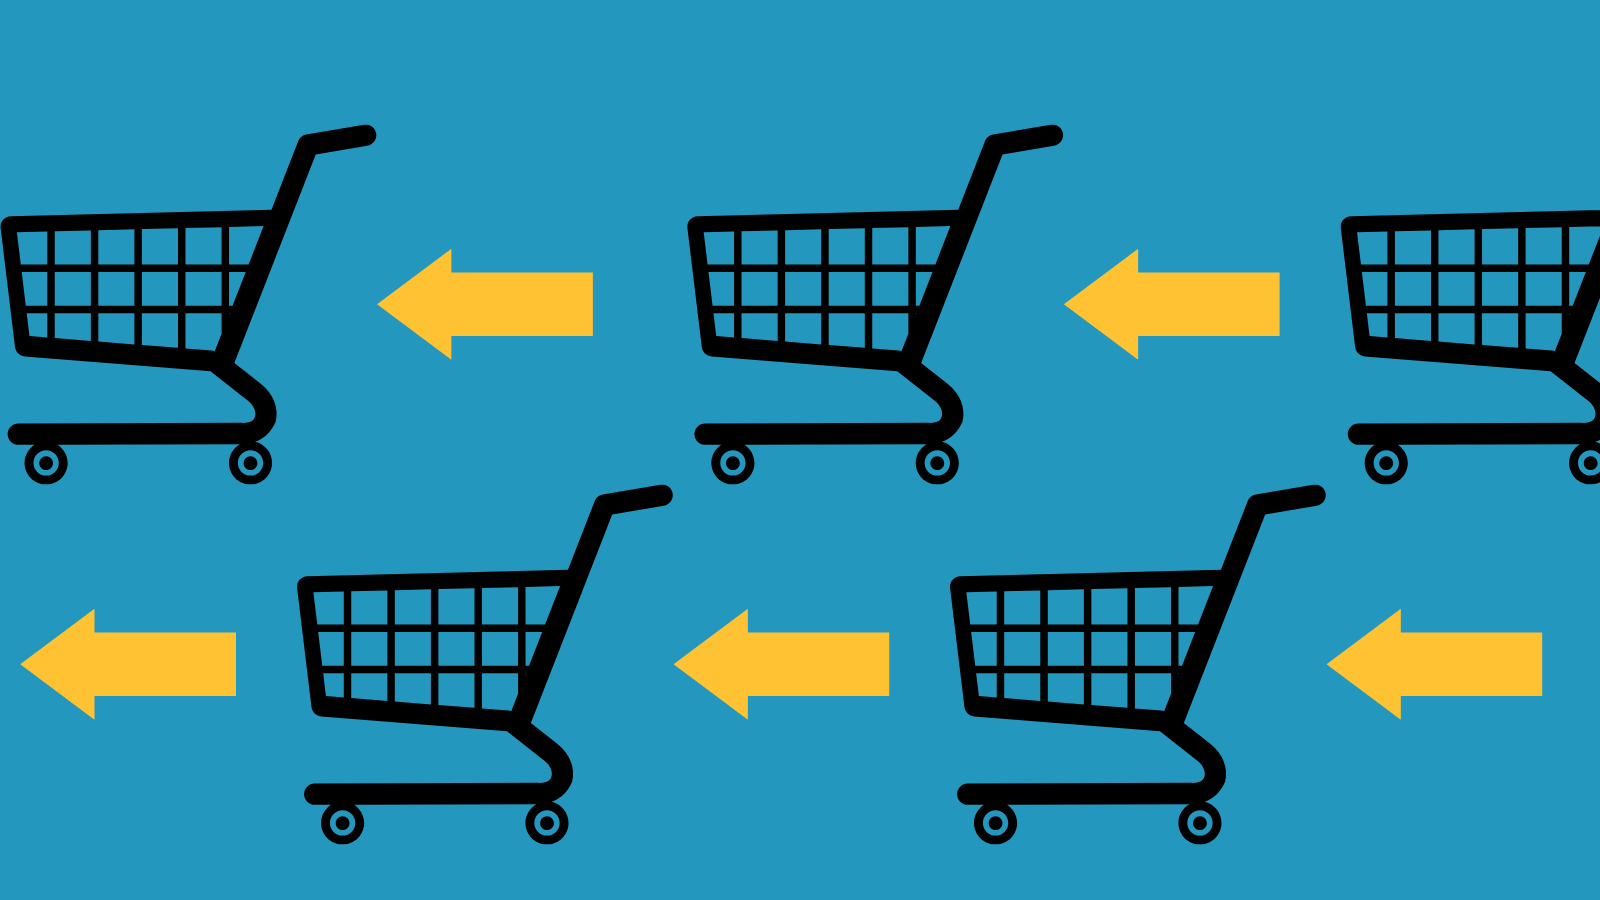 A shopping cart and an arrow pointing to the left in an alternating pattern